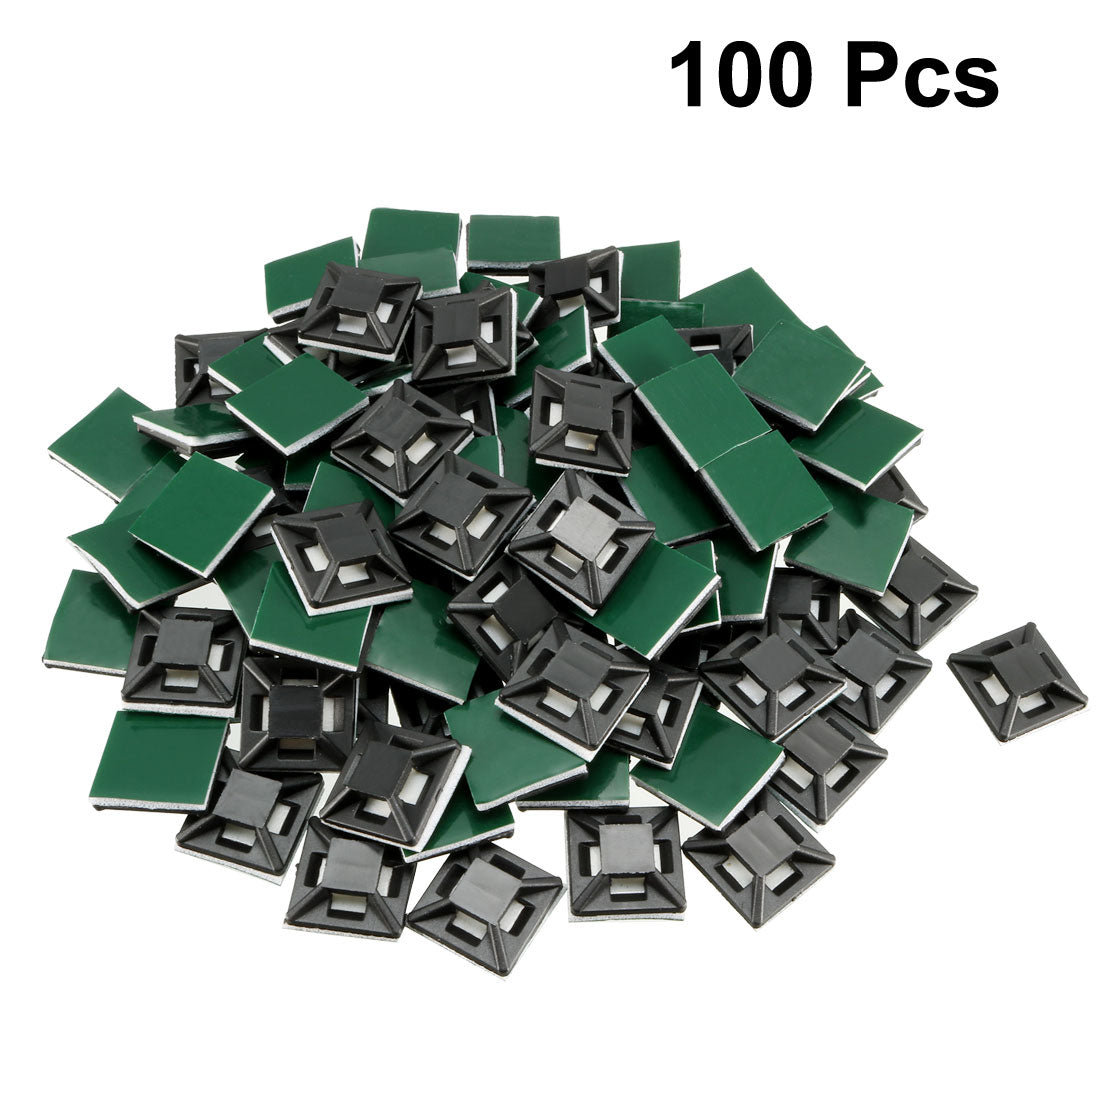 uxcell Uxcell 100pcs Self Adhesive Cable Tie Mounts Wire Base Holders 12.5mm x 12.5mm